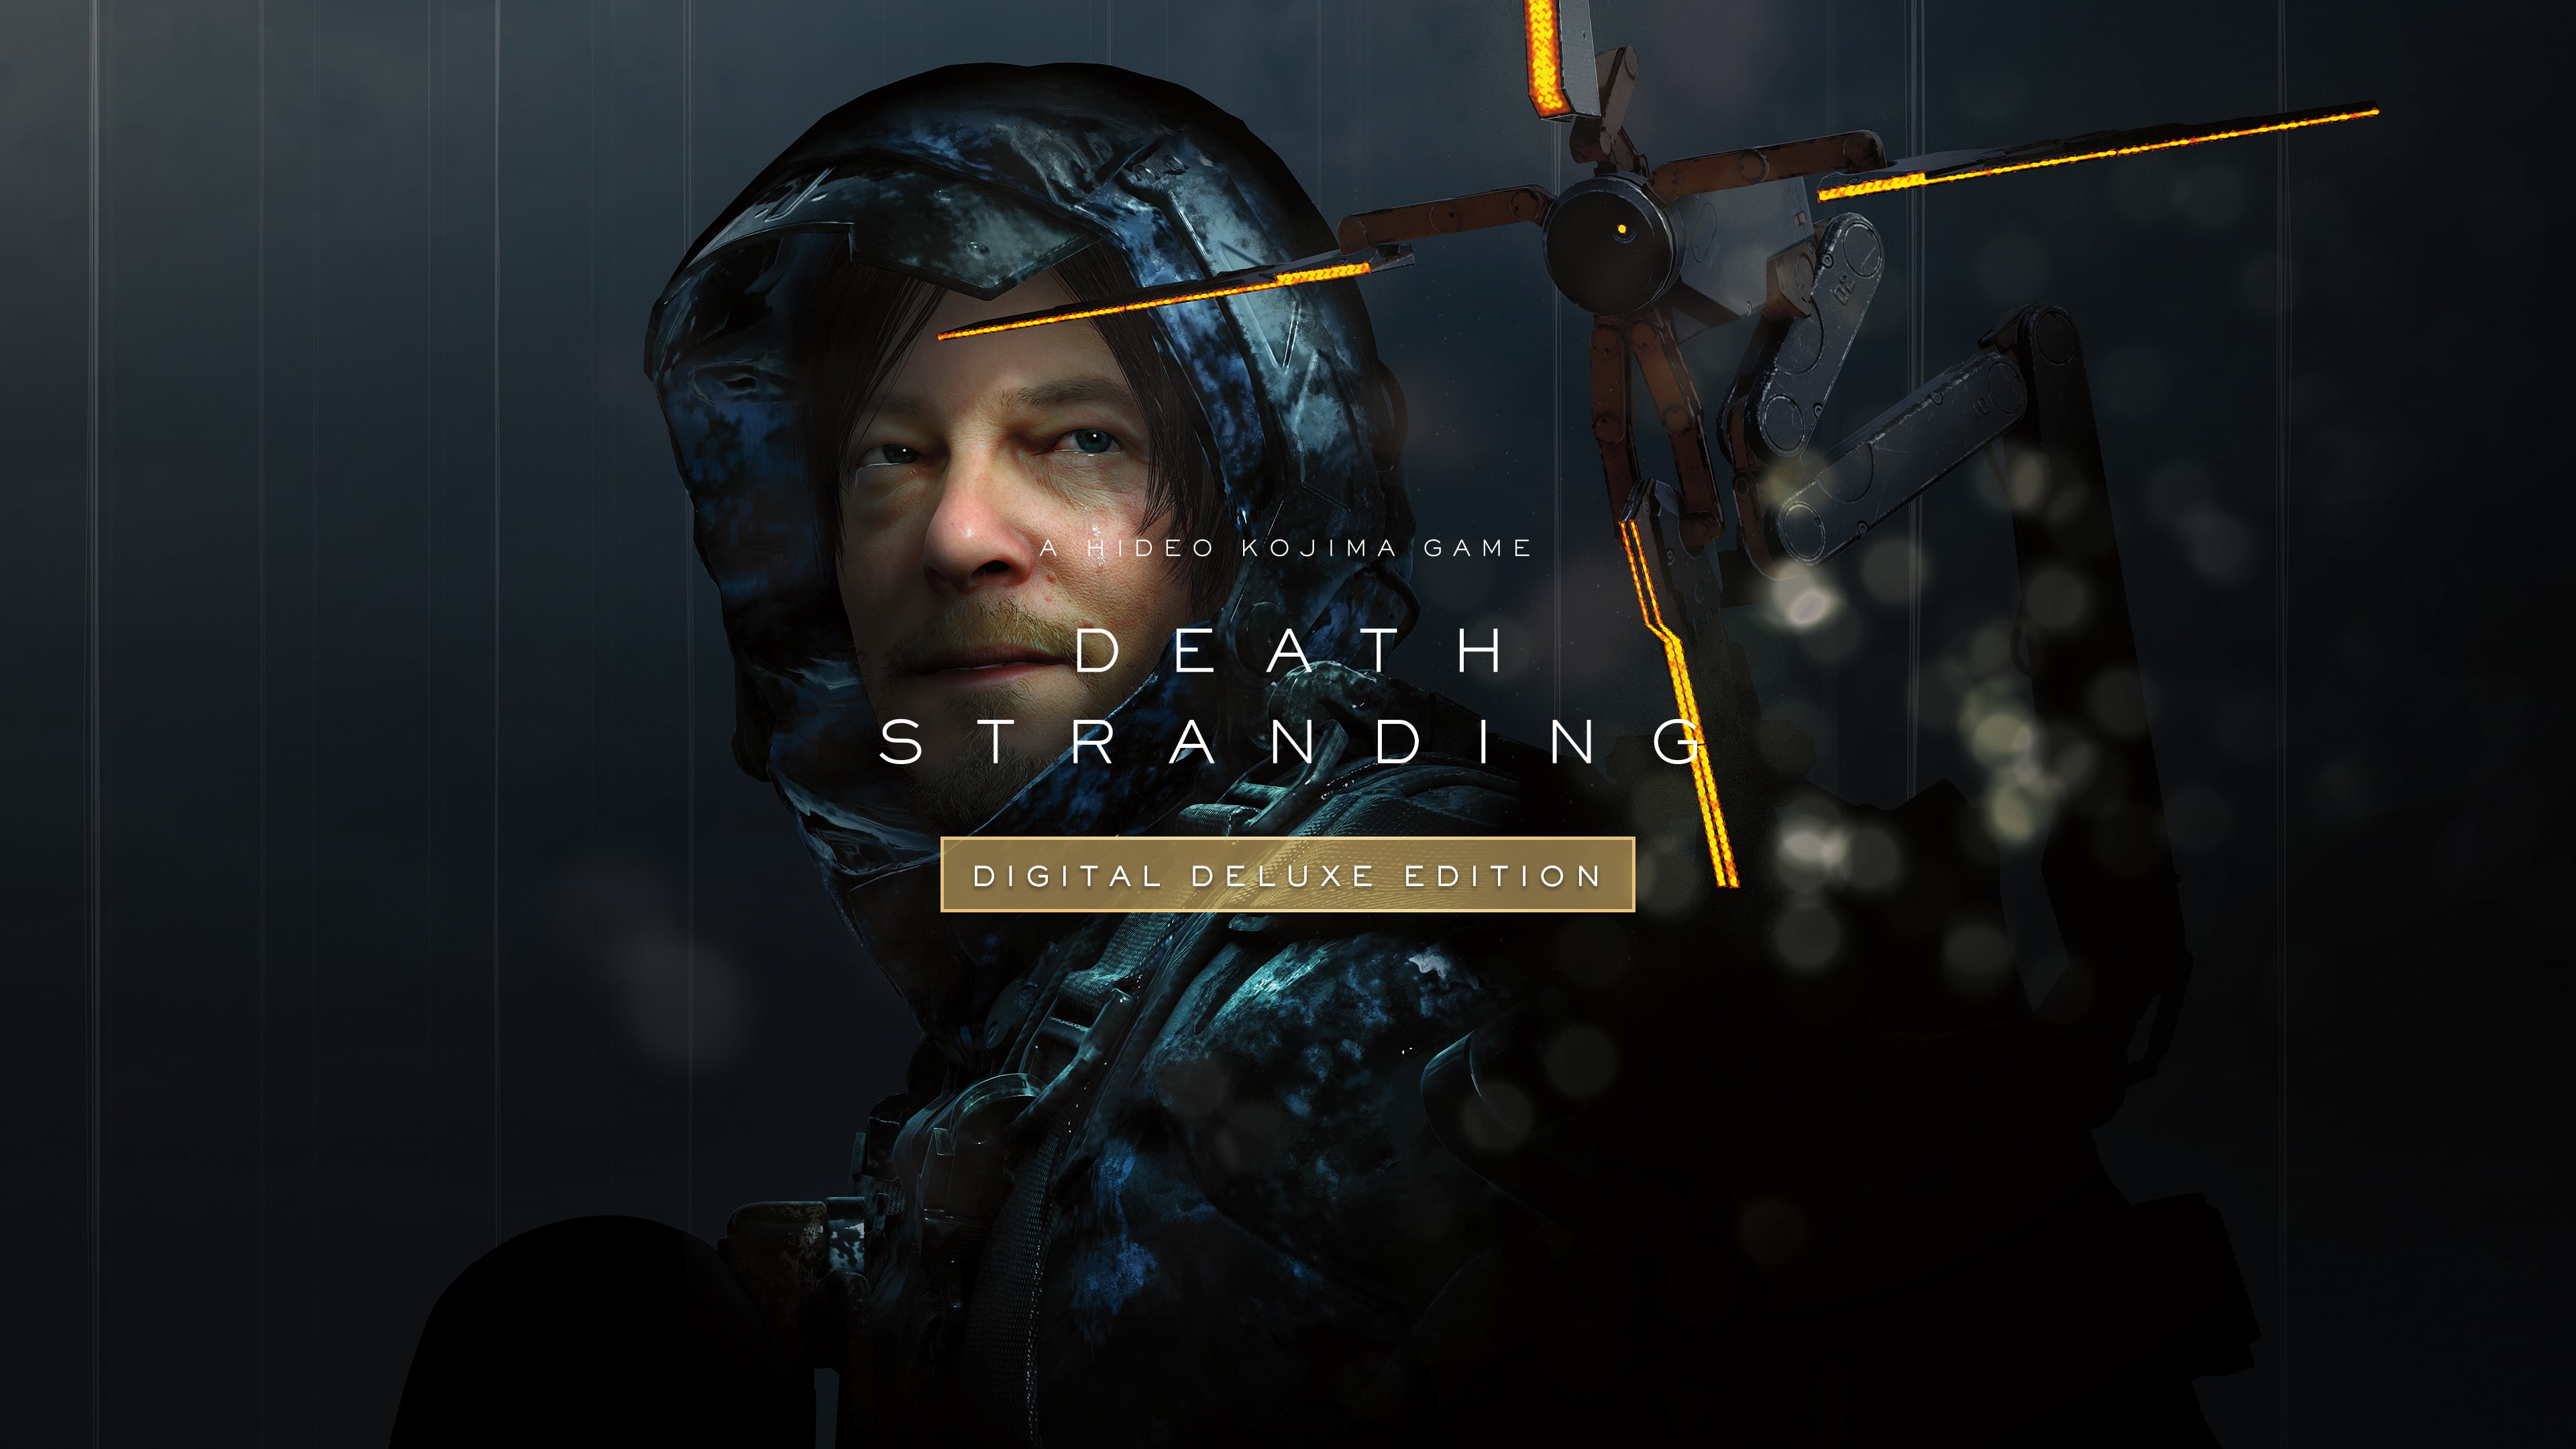 DEATH STRANDING Digital Deluxe Edition (Simplified Chinese, English, Korean, Traditional Chinese)